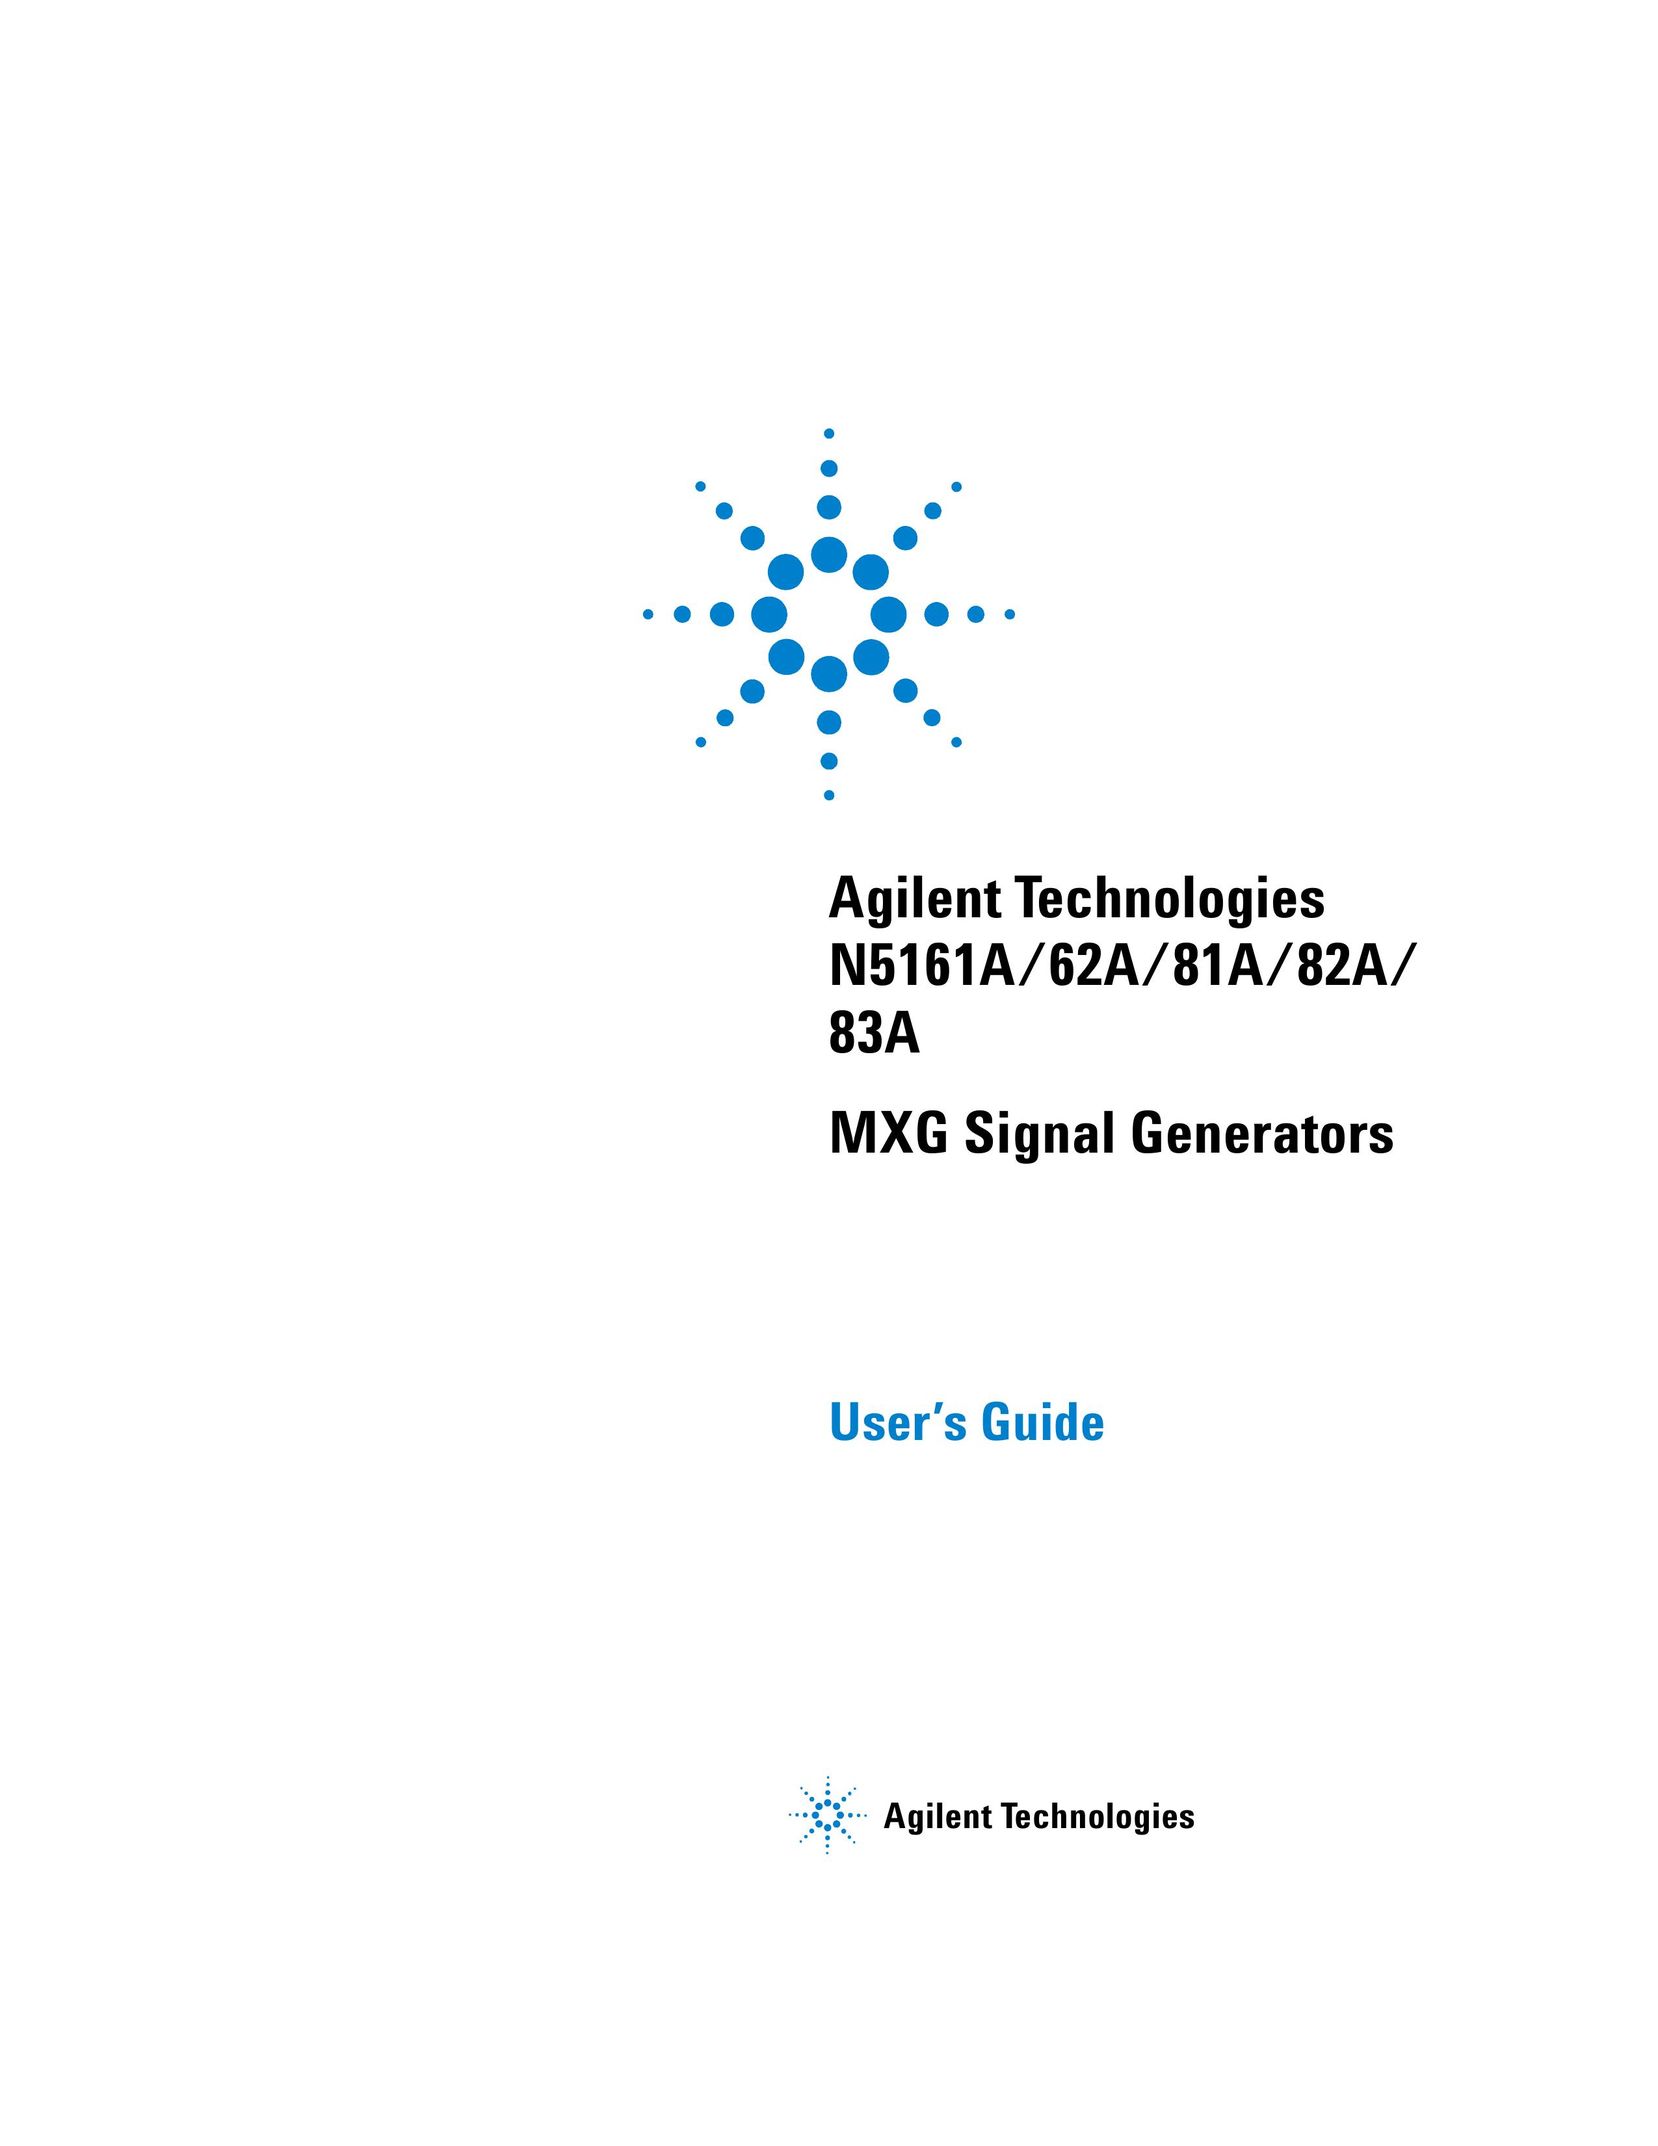 Agilent Technologies 62A Stereo System User Manual